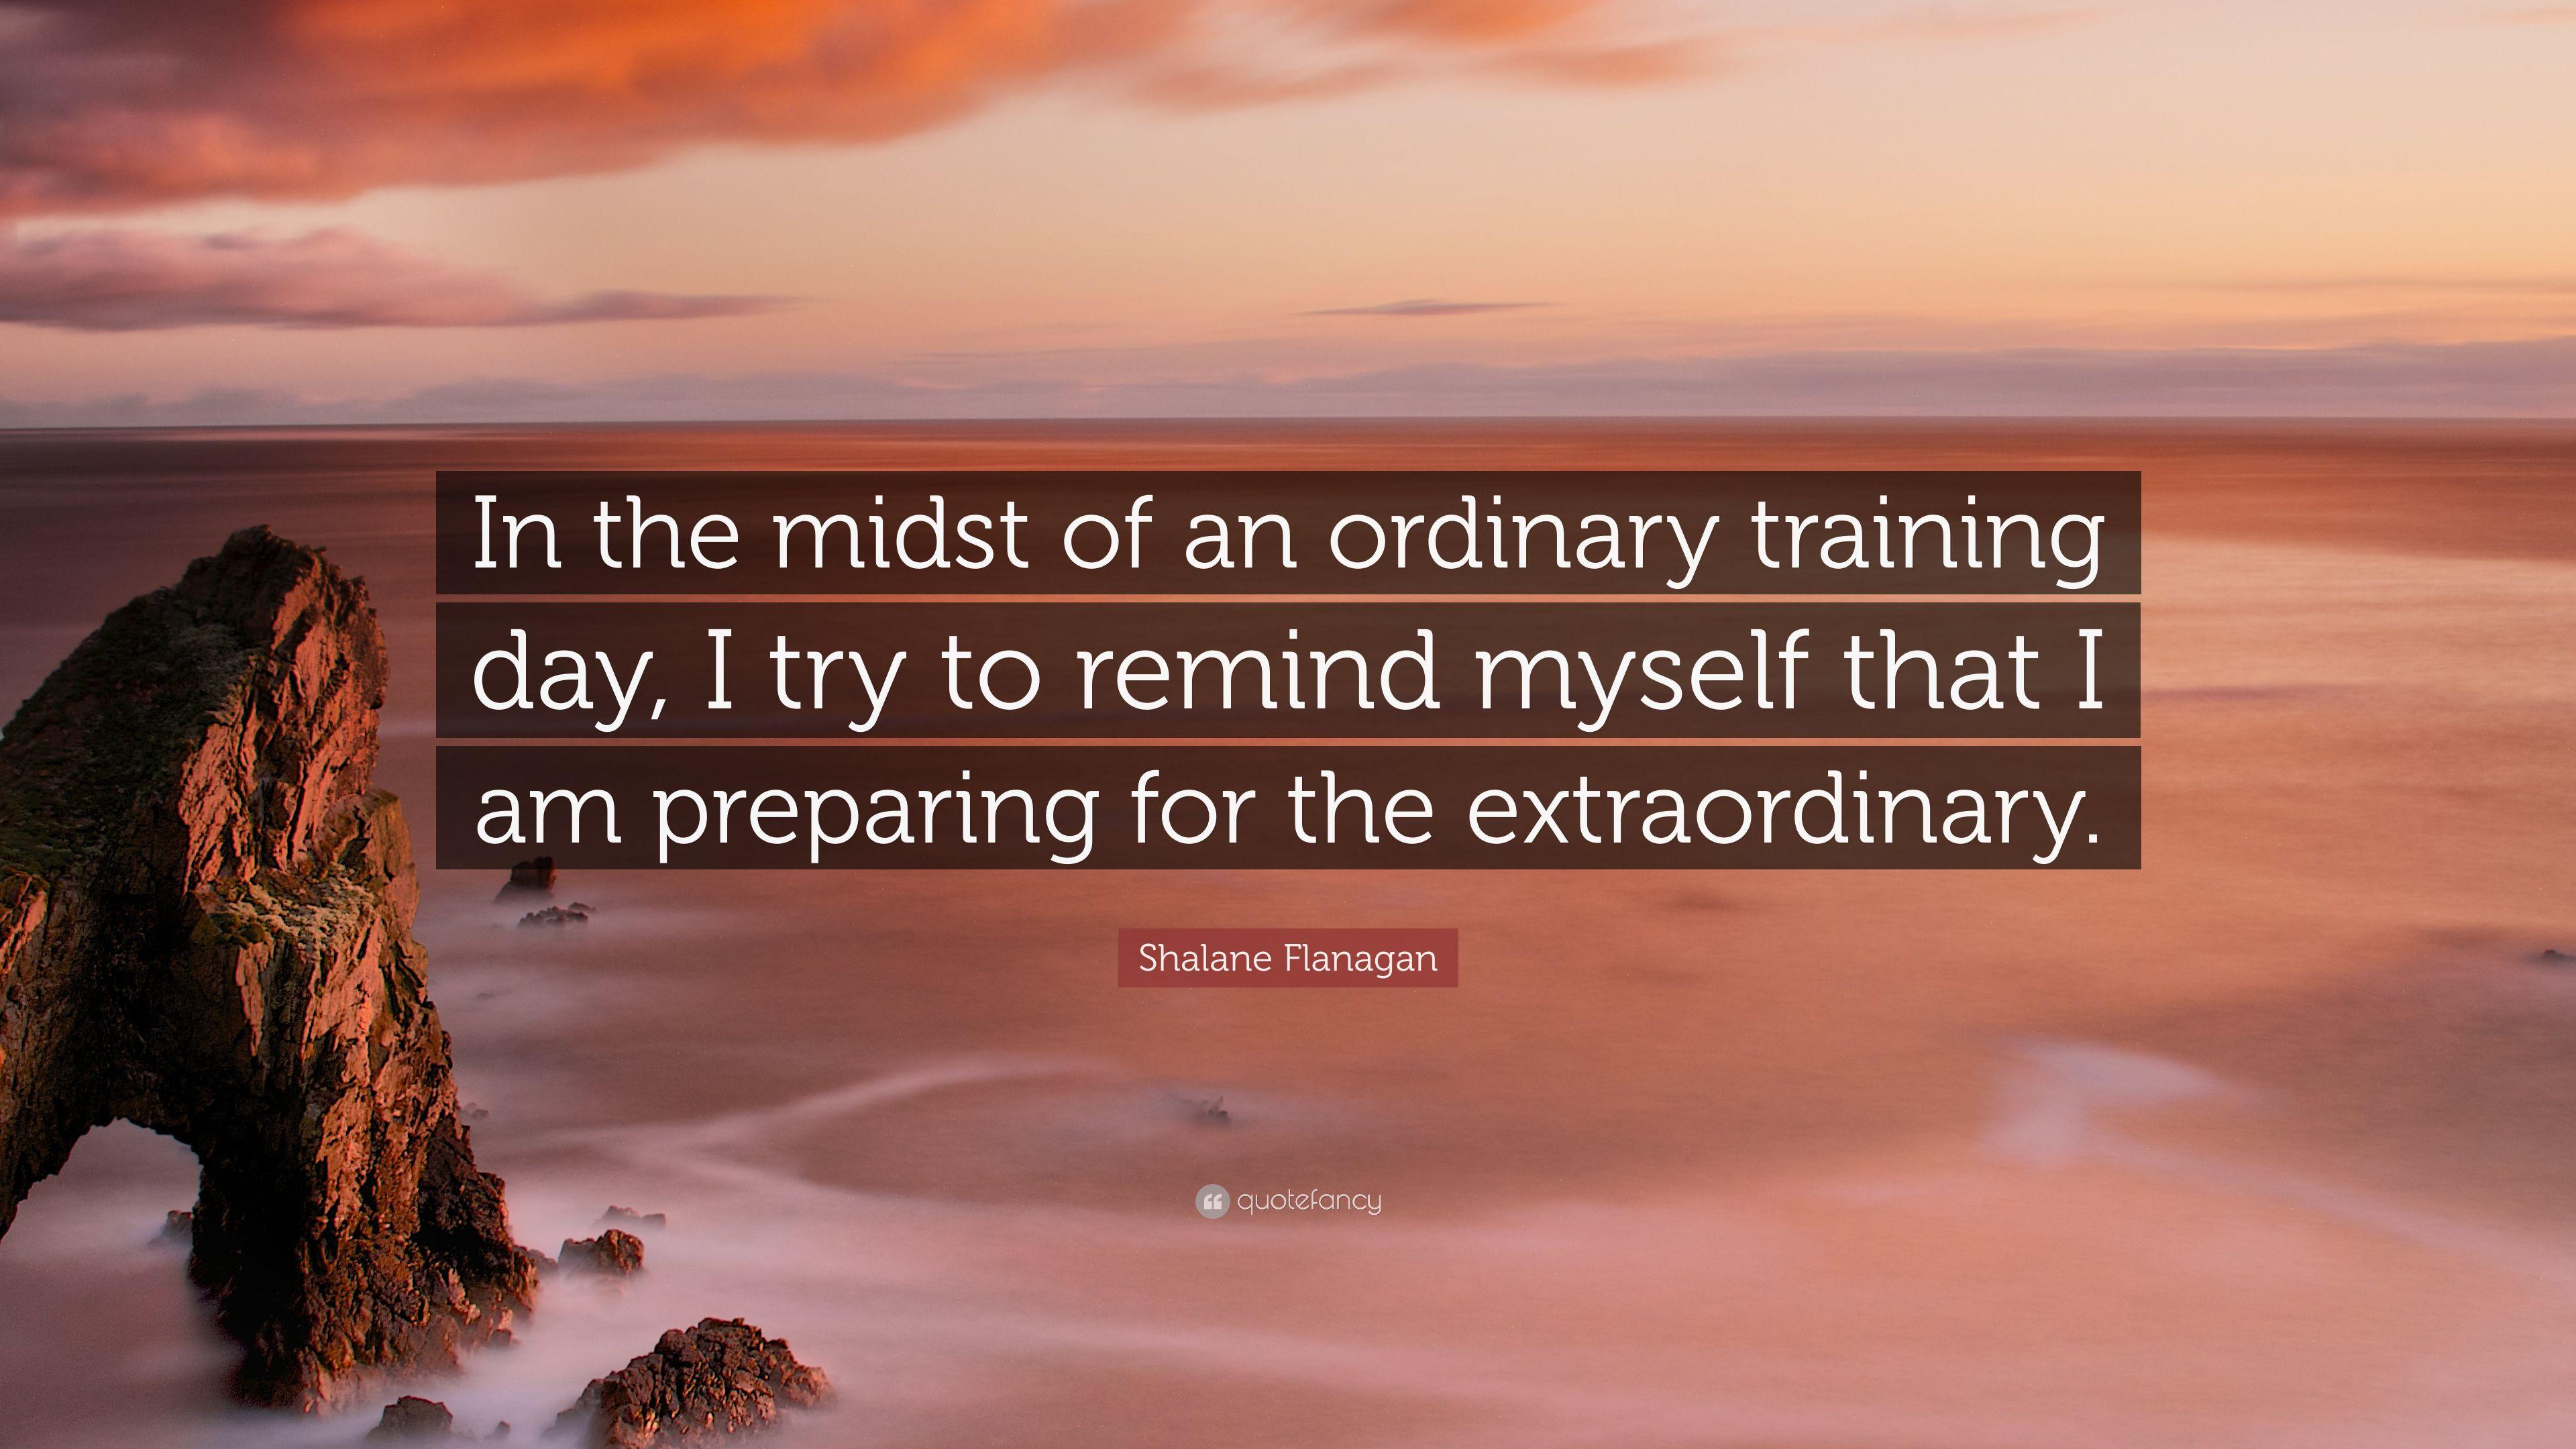 Shalane Flanagan Quote: “In the midst of an ordinary training day, I